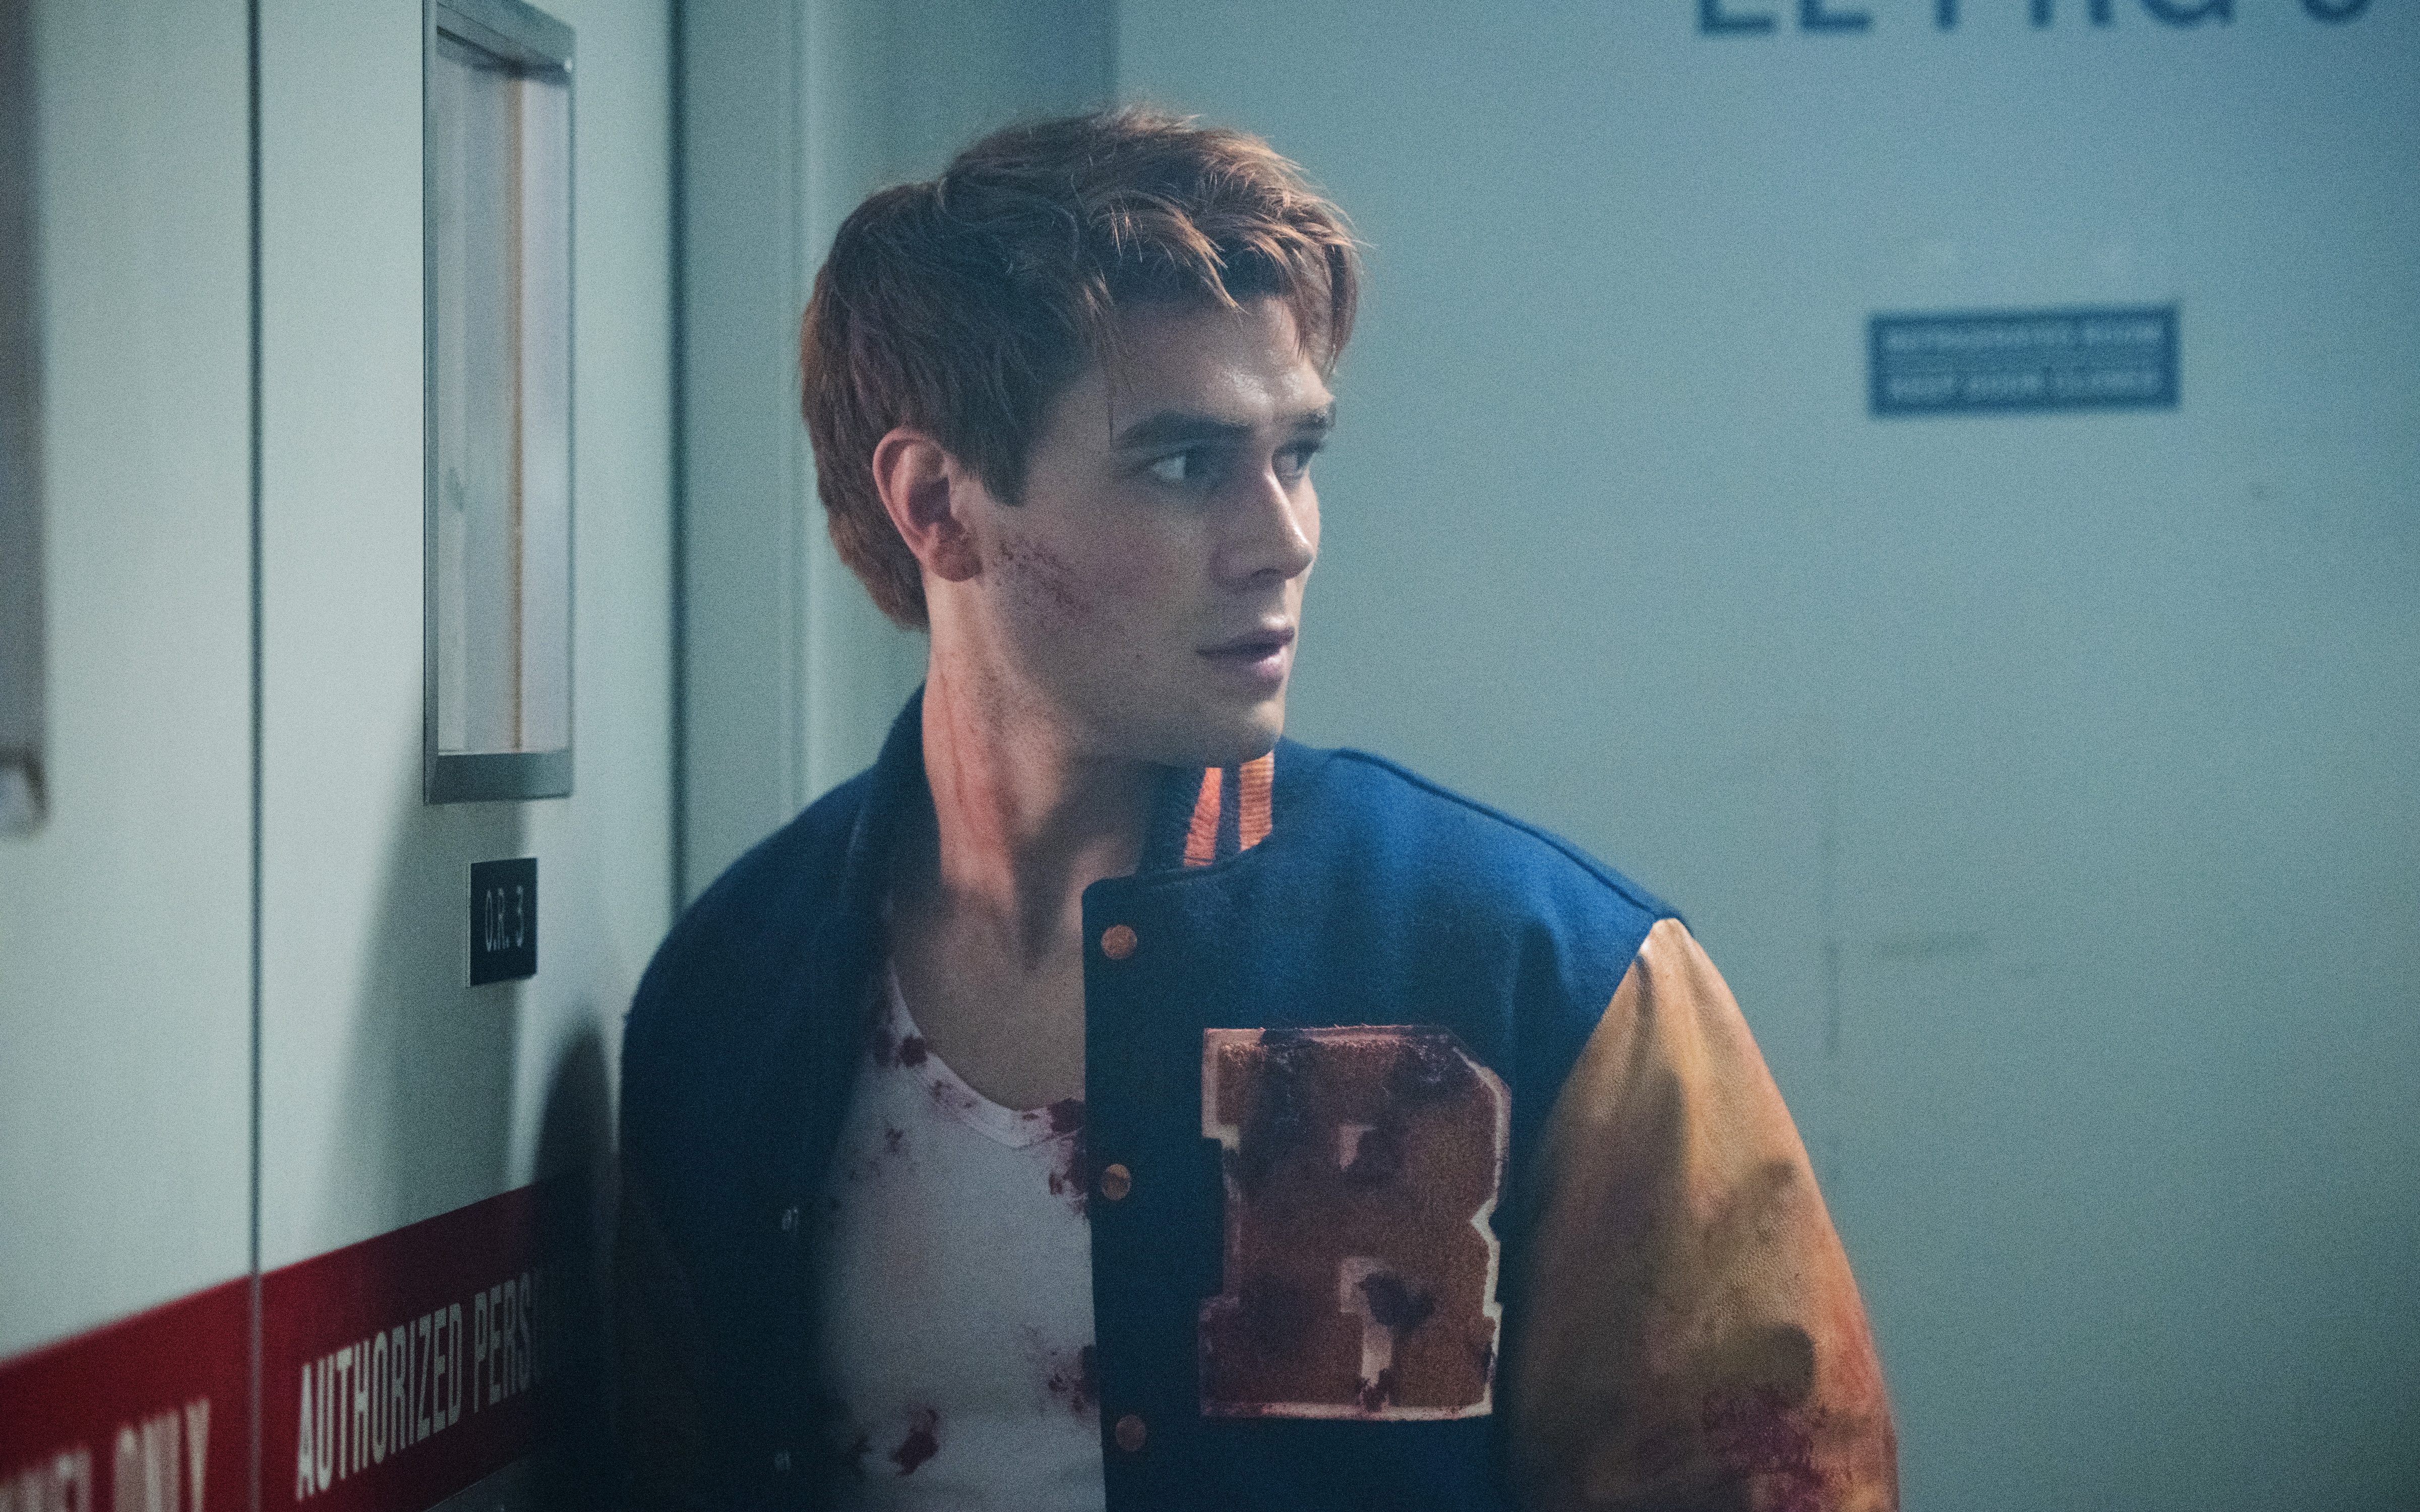 Riverdale KJ Apa As Archie Andrews, HD Tv Shows, 4k Wallpapers, Images